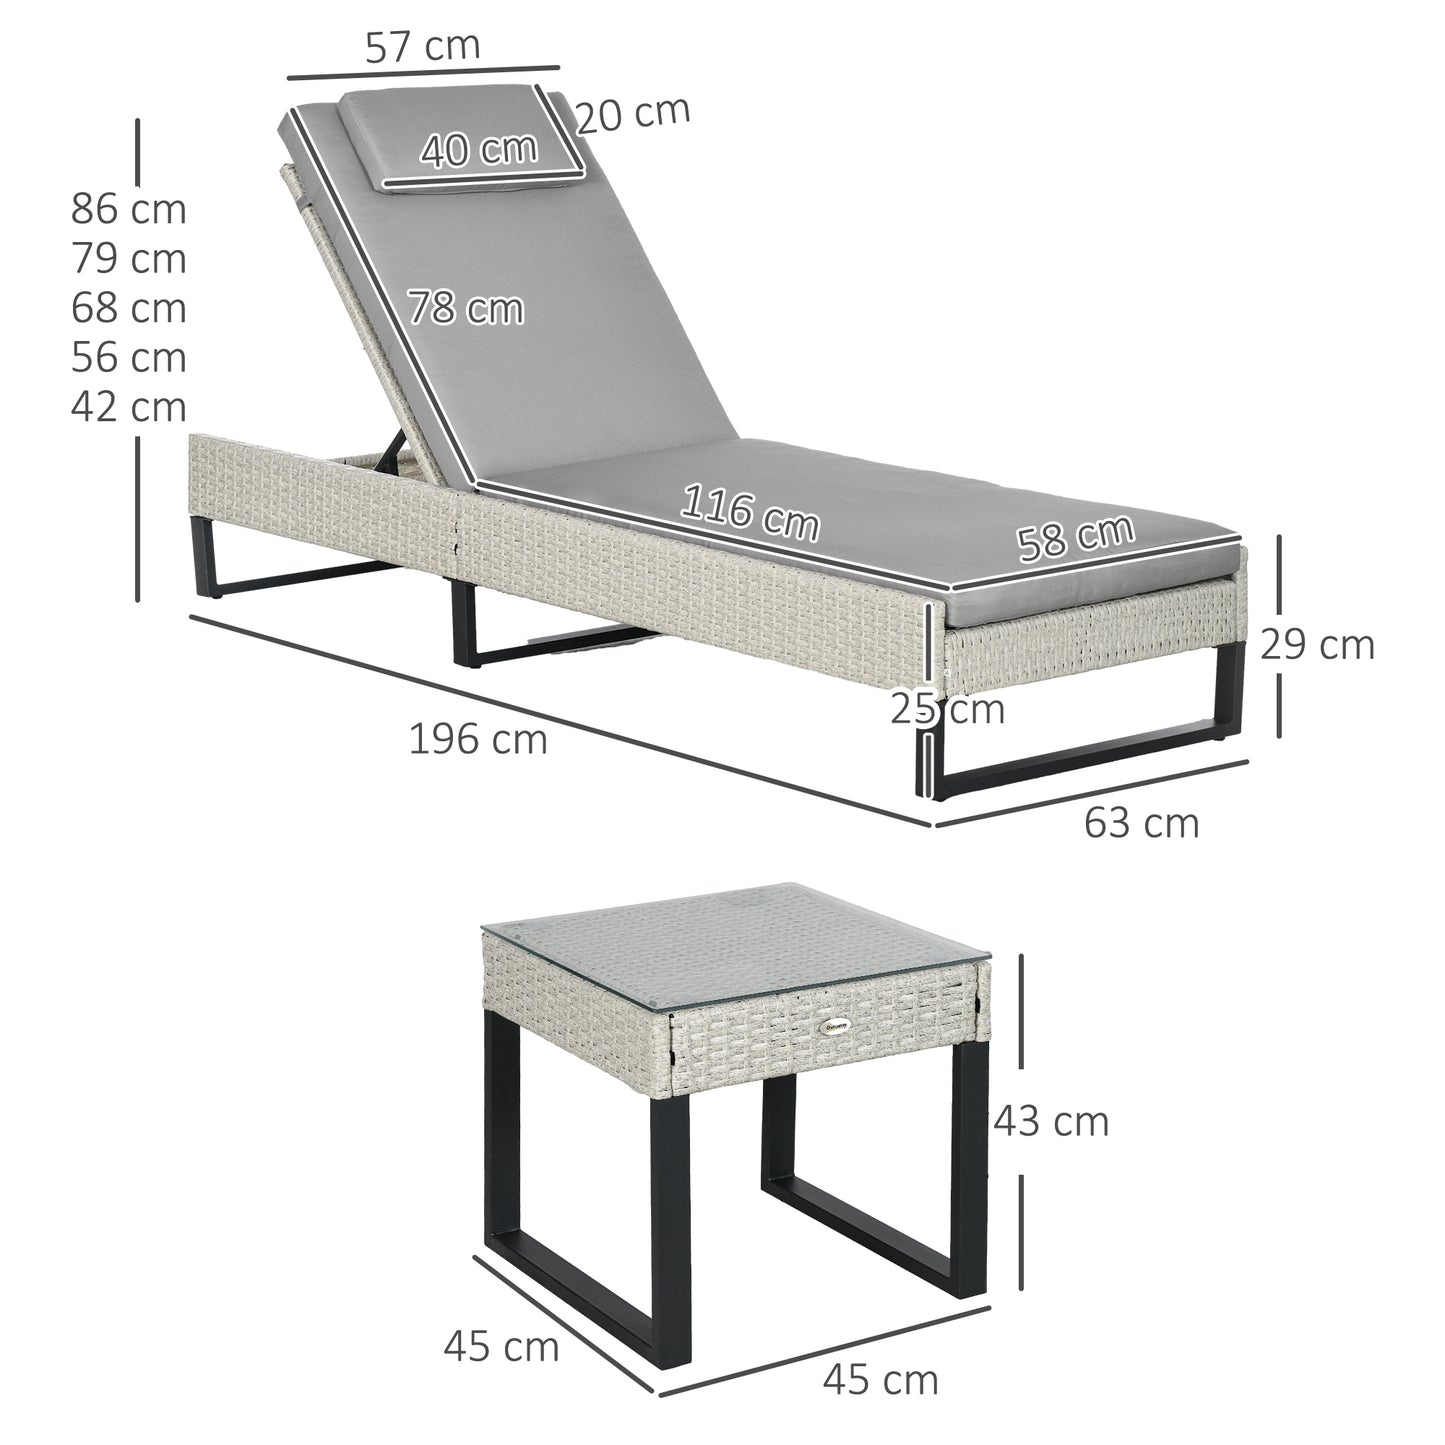 Outsunny Rattan 3-Piece Lounger Set with Table - Light Grey